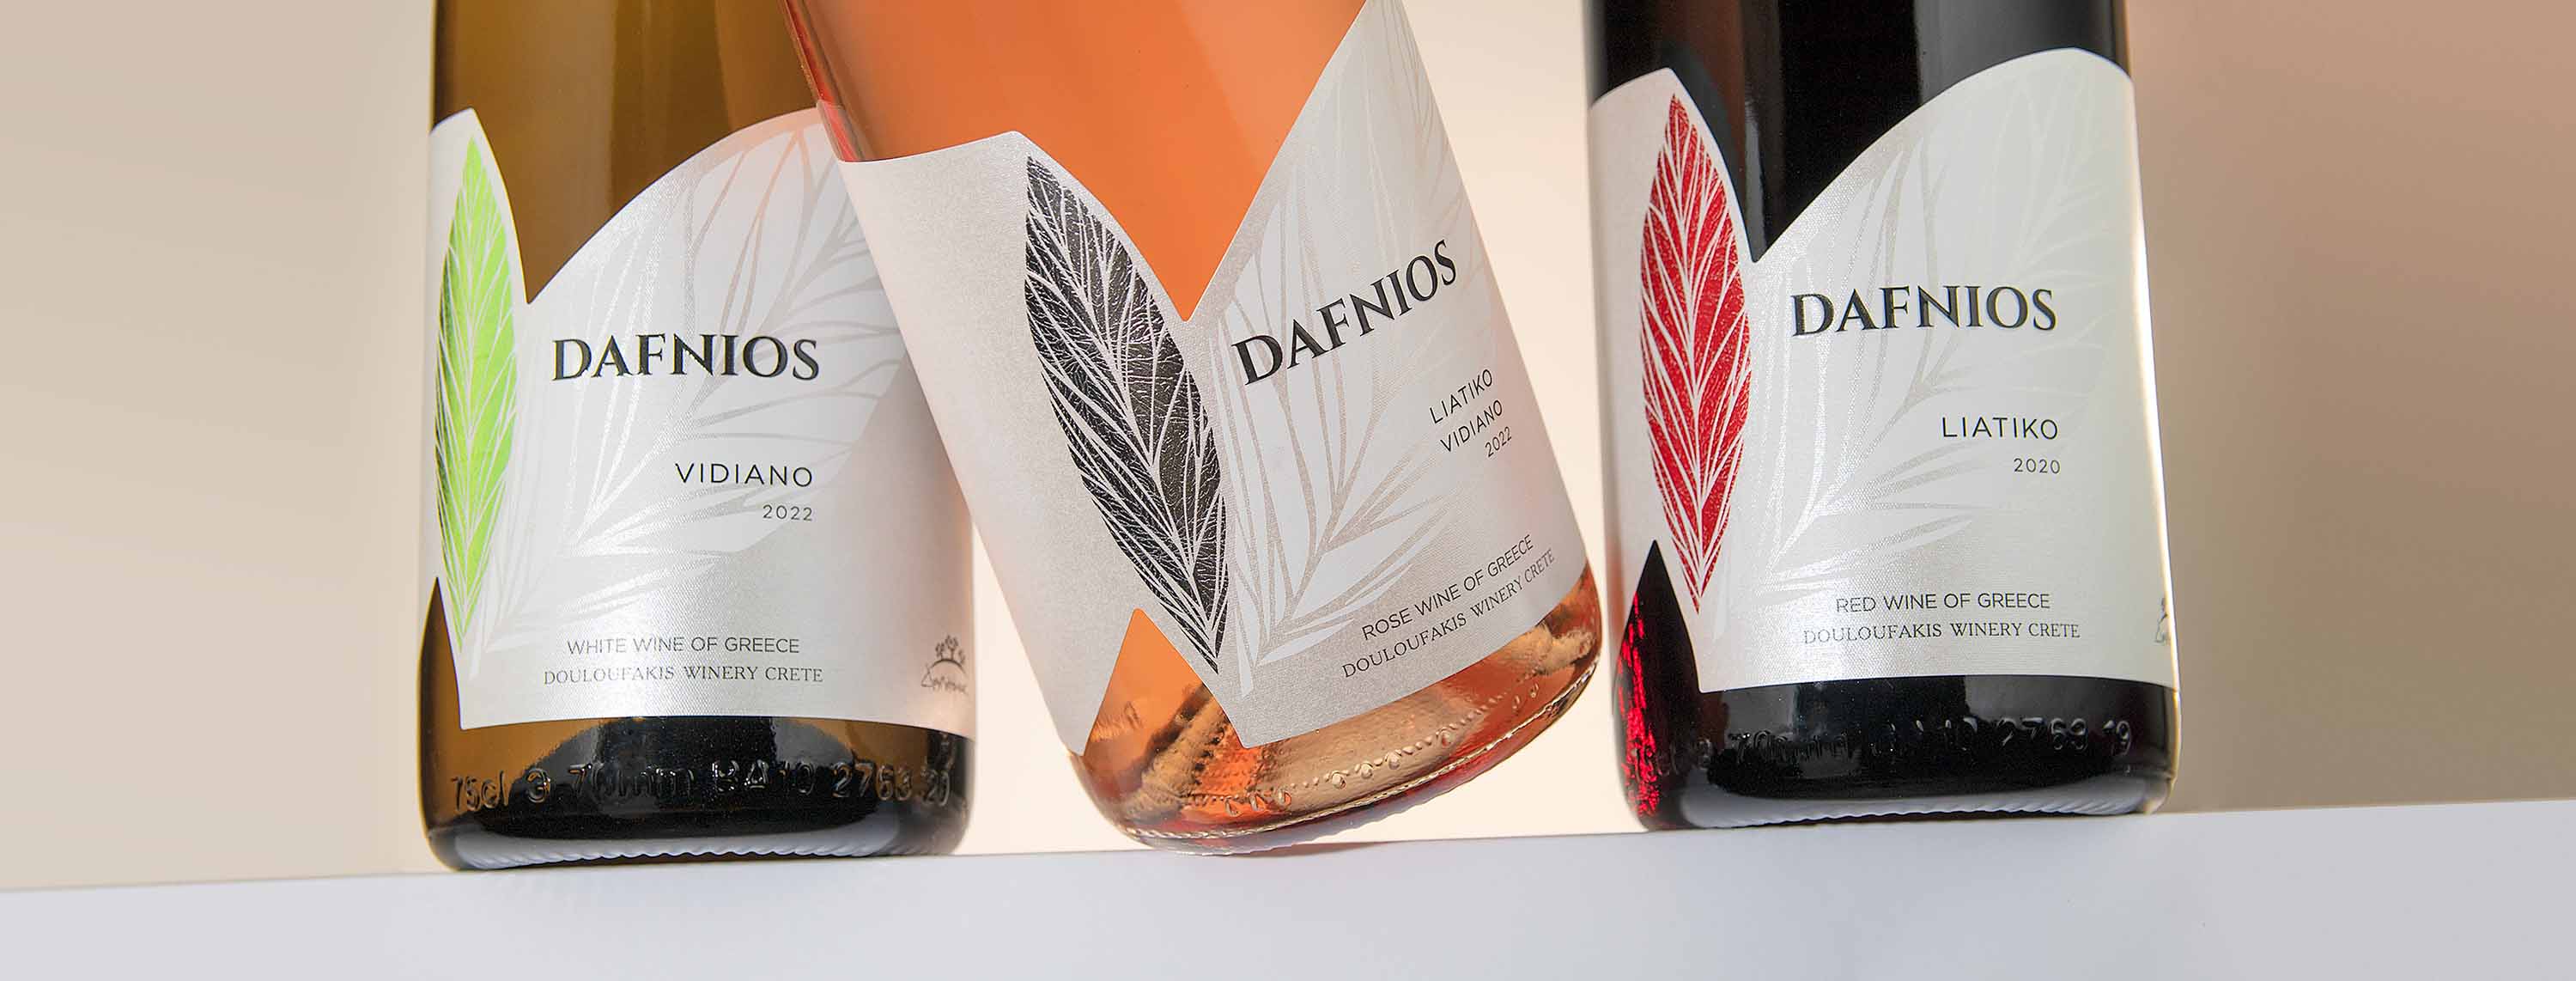 New label for Dafnios Douloufakis